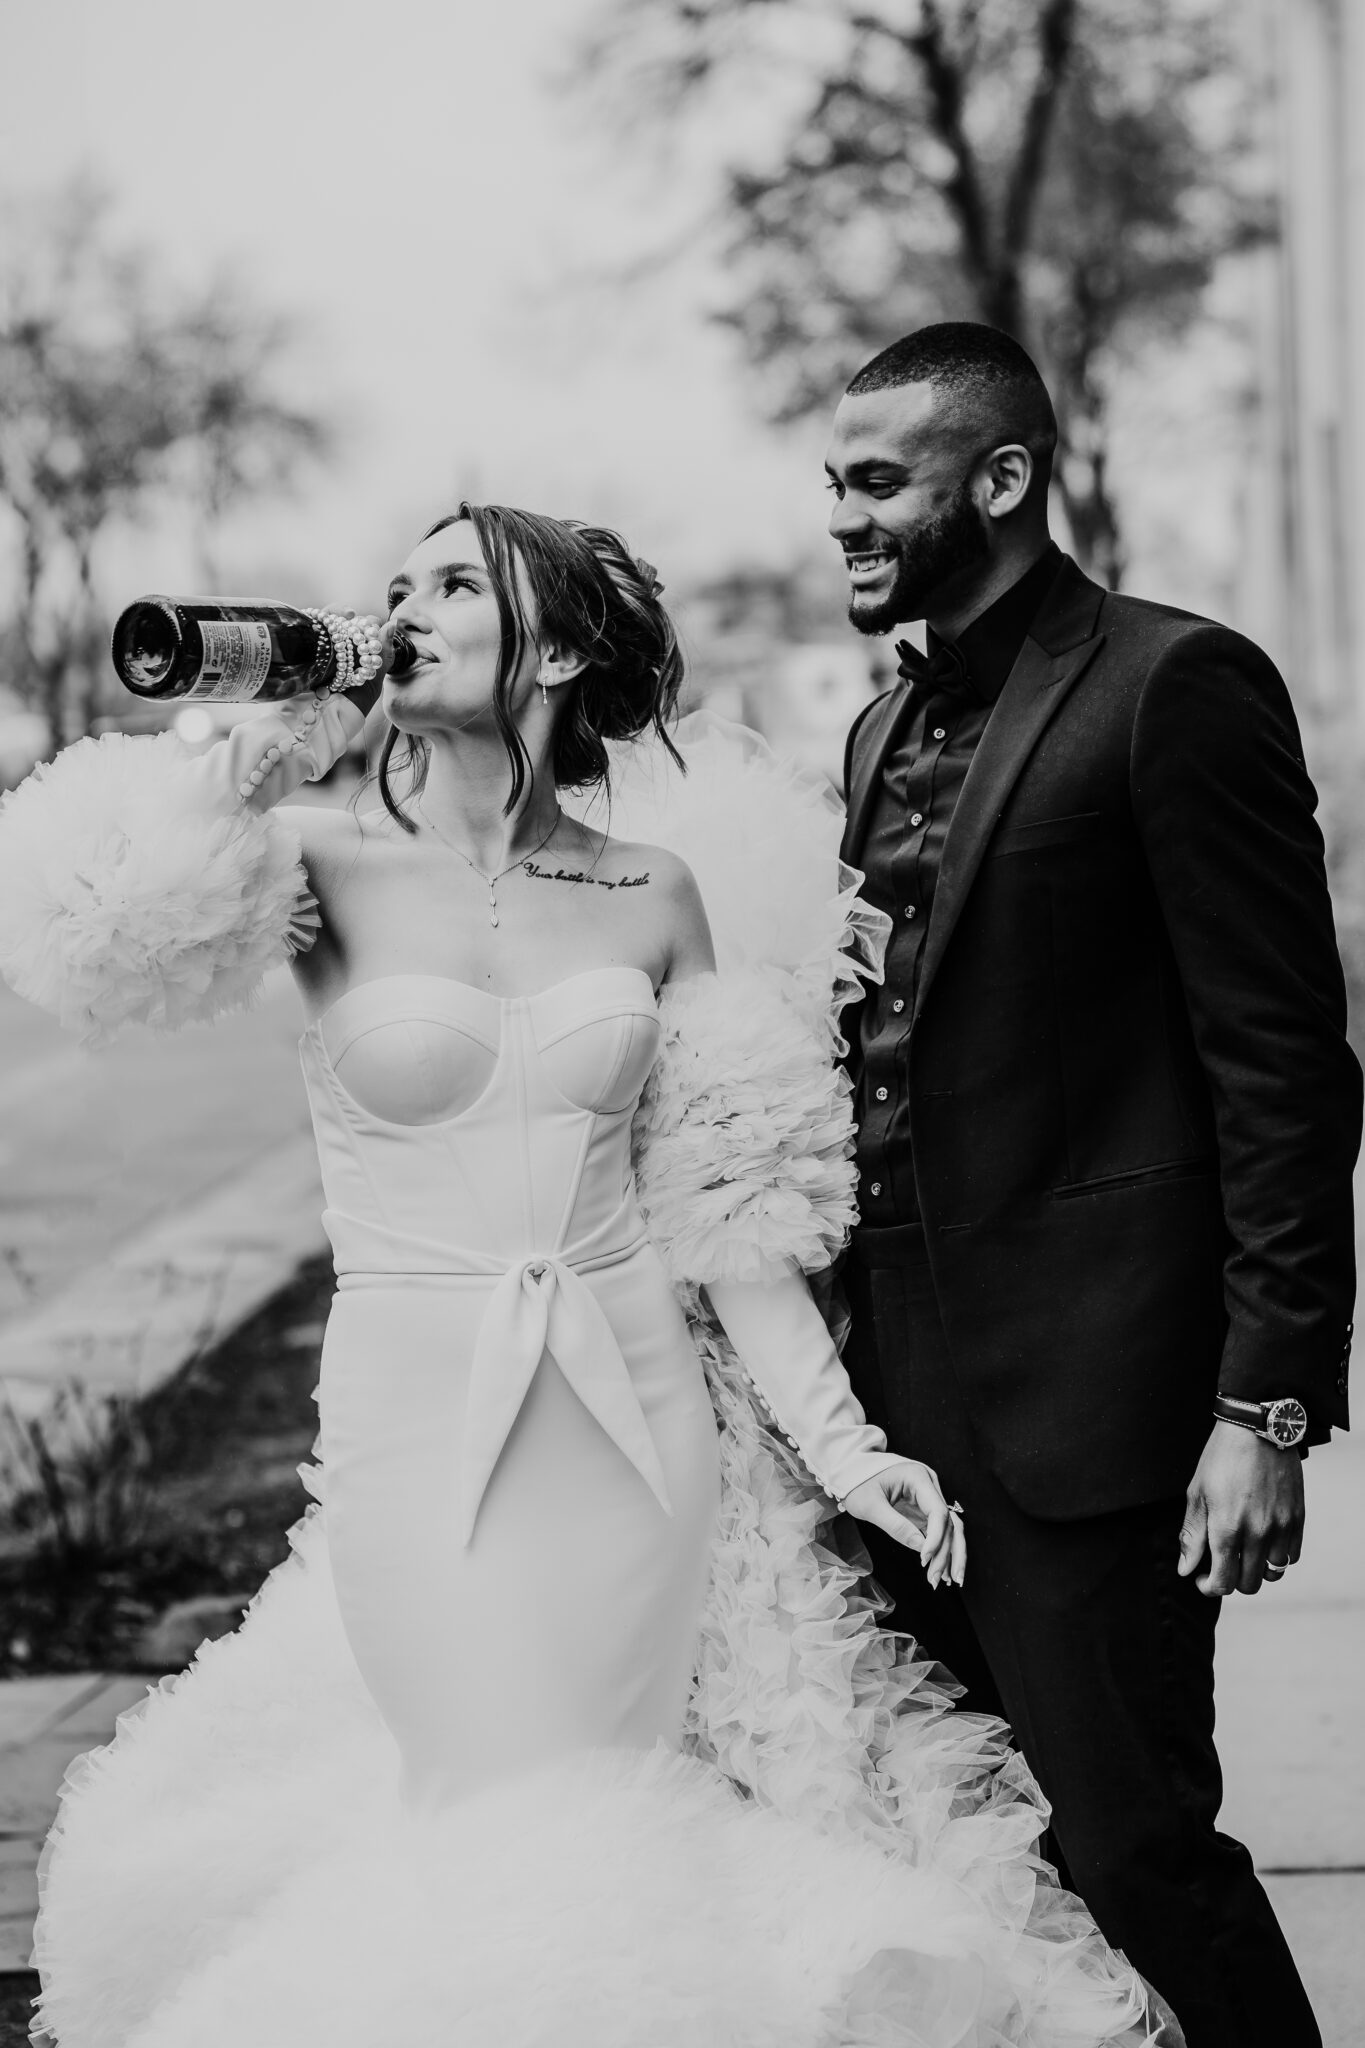 A bride takes a celebratory sip of champagne from the bottle while her groom smiles affectionately at her, capturing a moment of joy and intimacy between the newlyweds